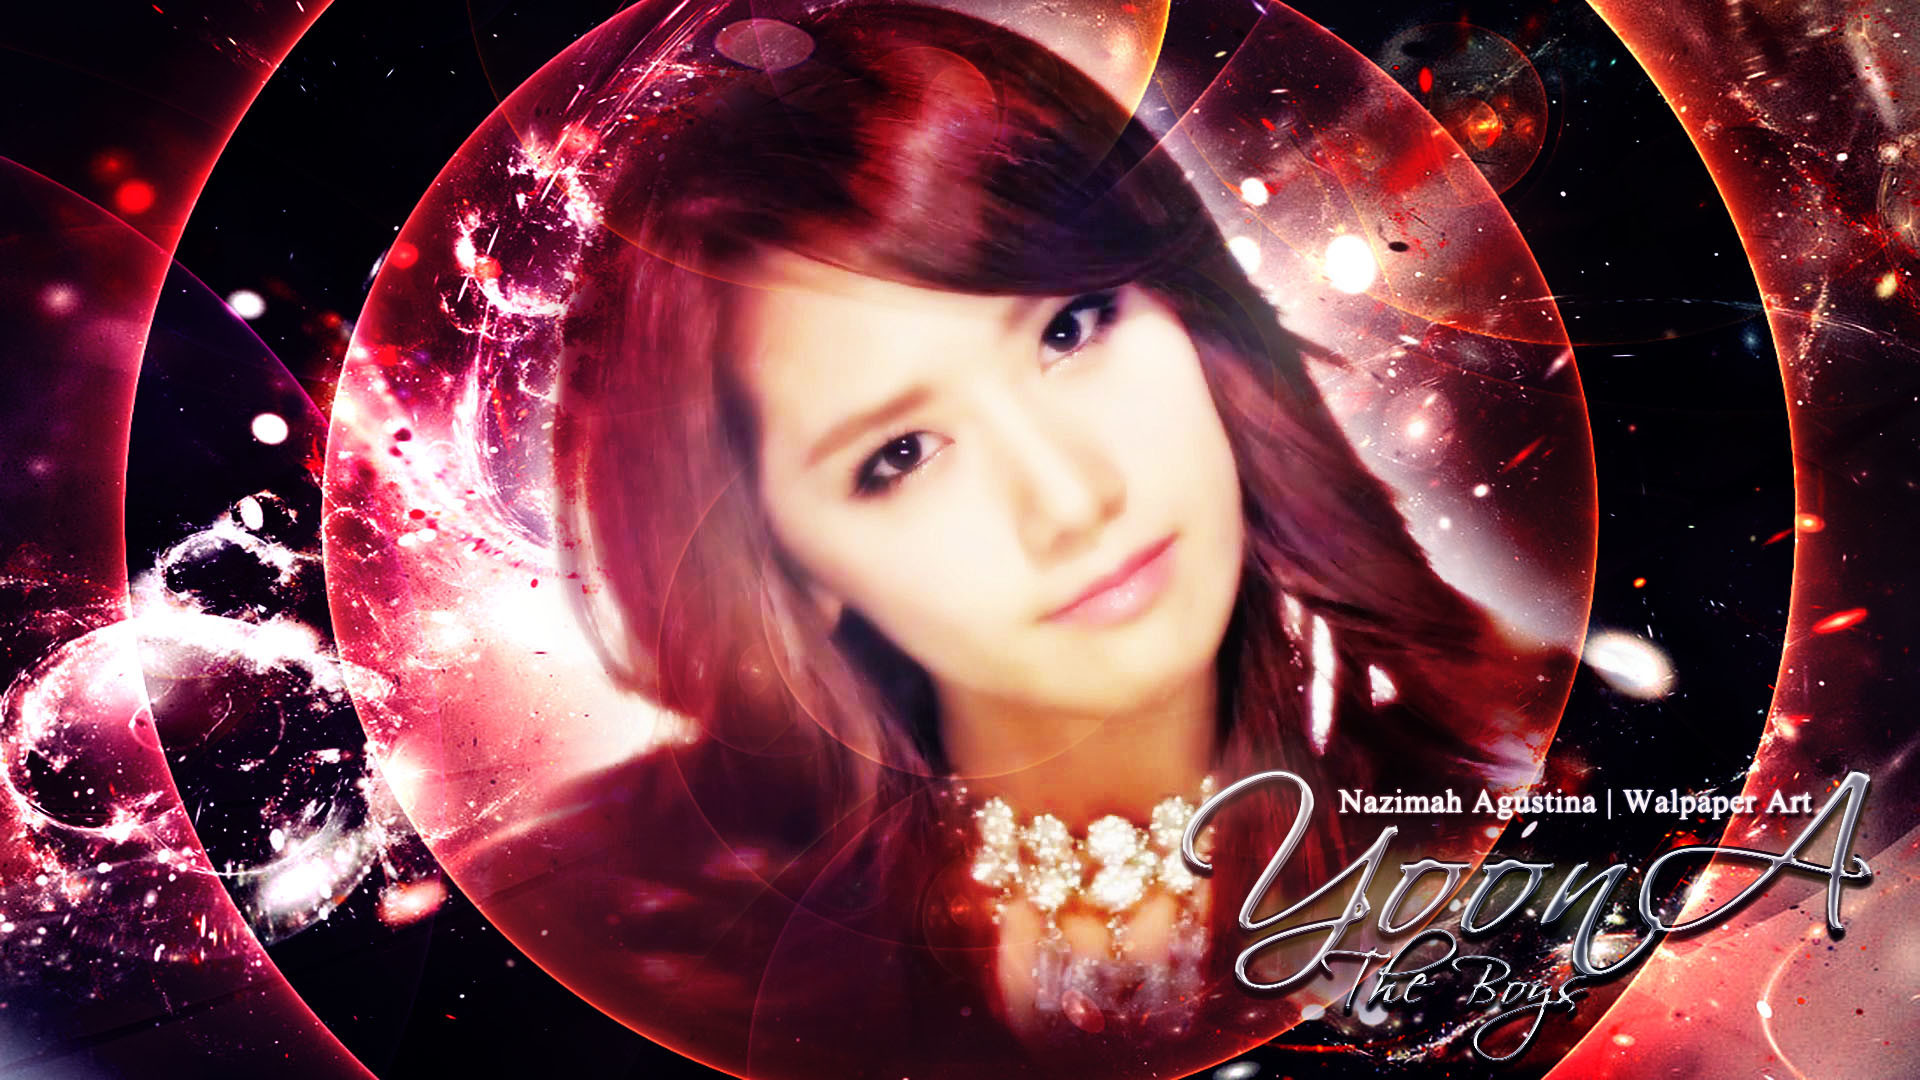 1920x1080 im yoona the boys comeback 2011 red wallpaper by nazimah agustina